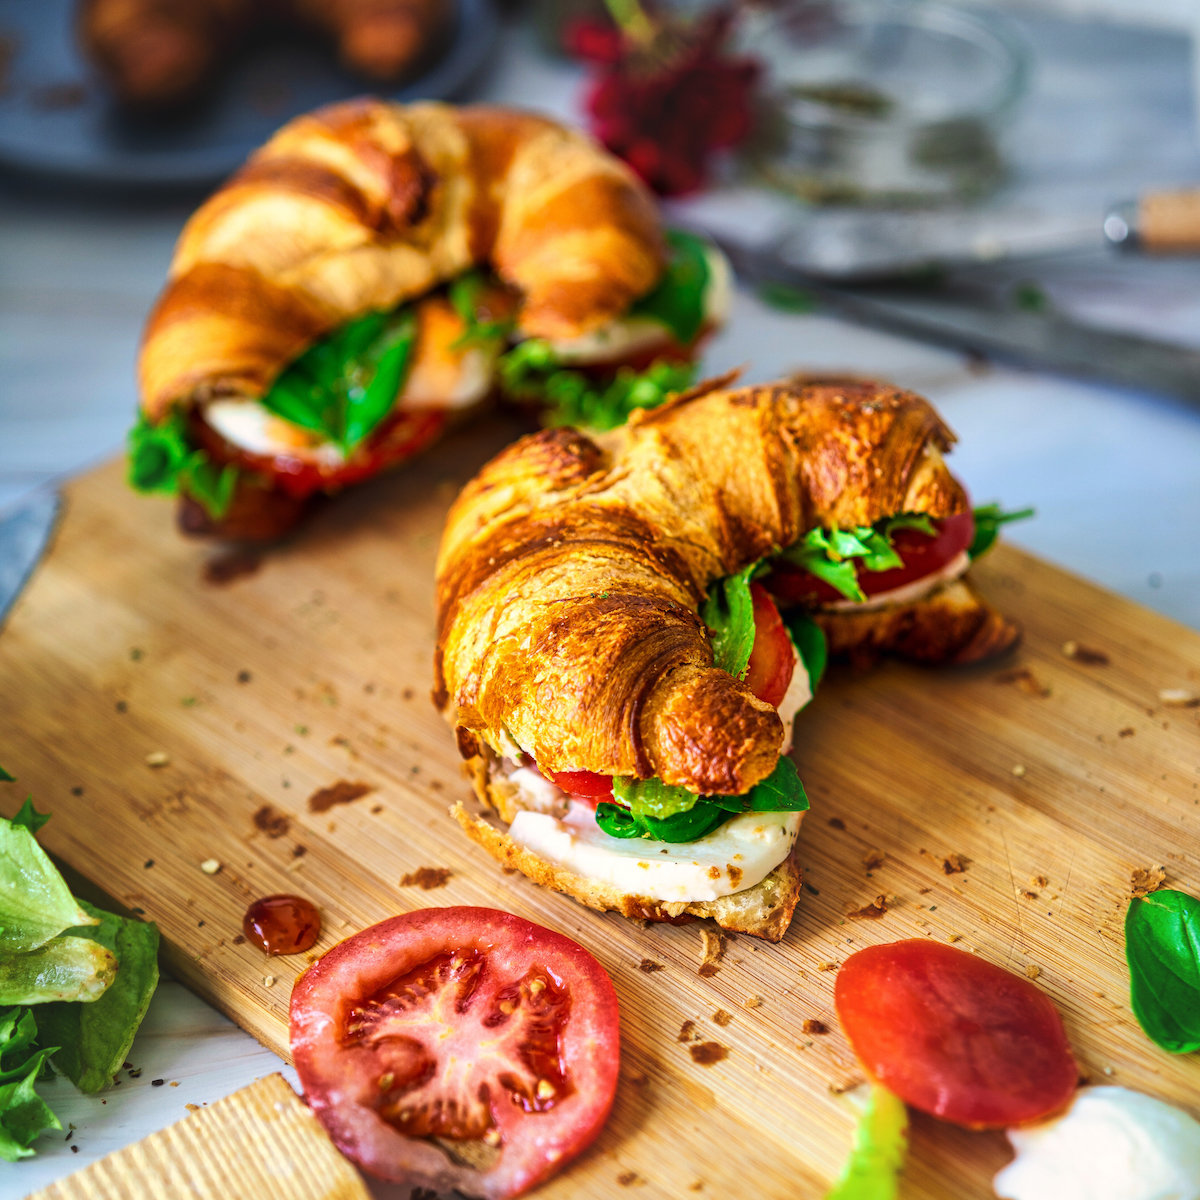 Caprese Croissant Sandwich - (Step-By-Step Picture + Video Recipe)